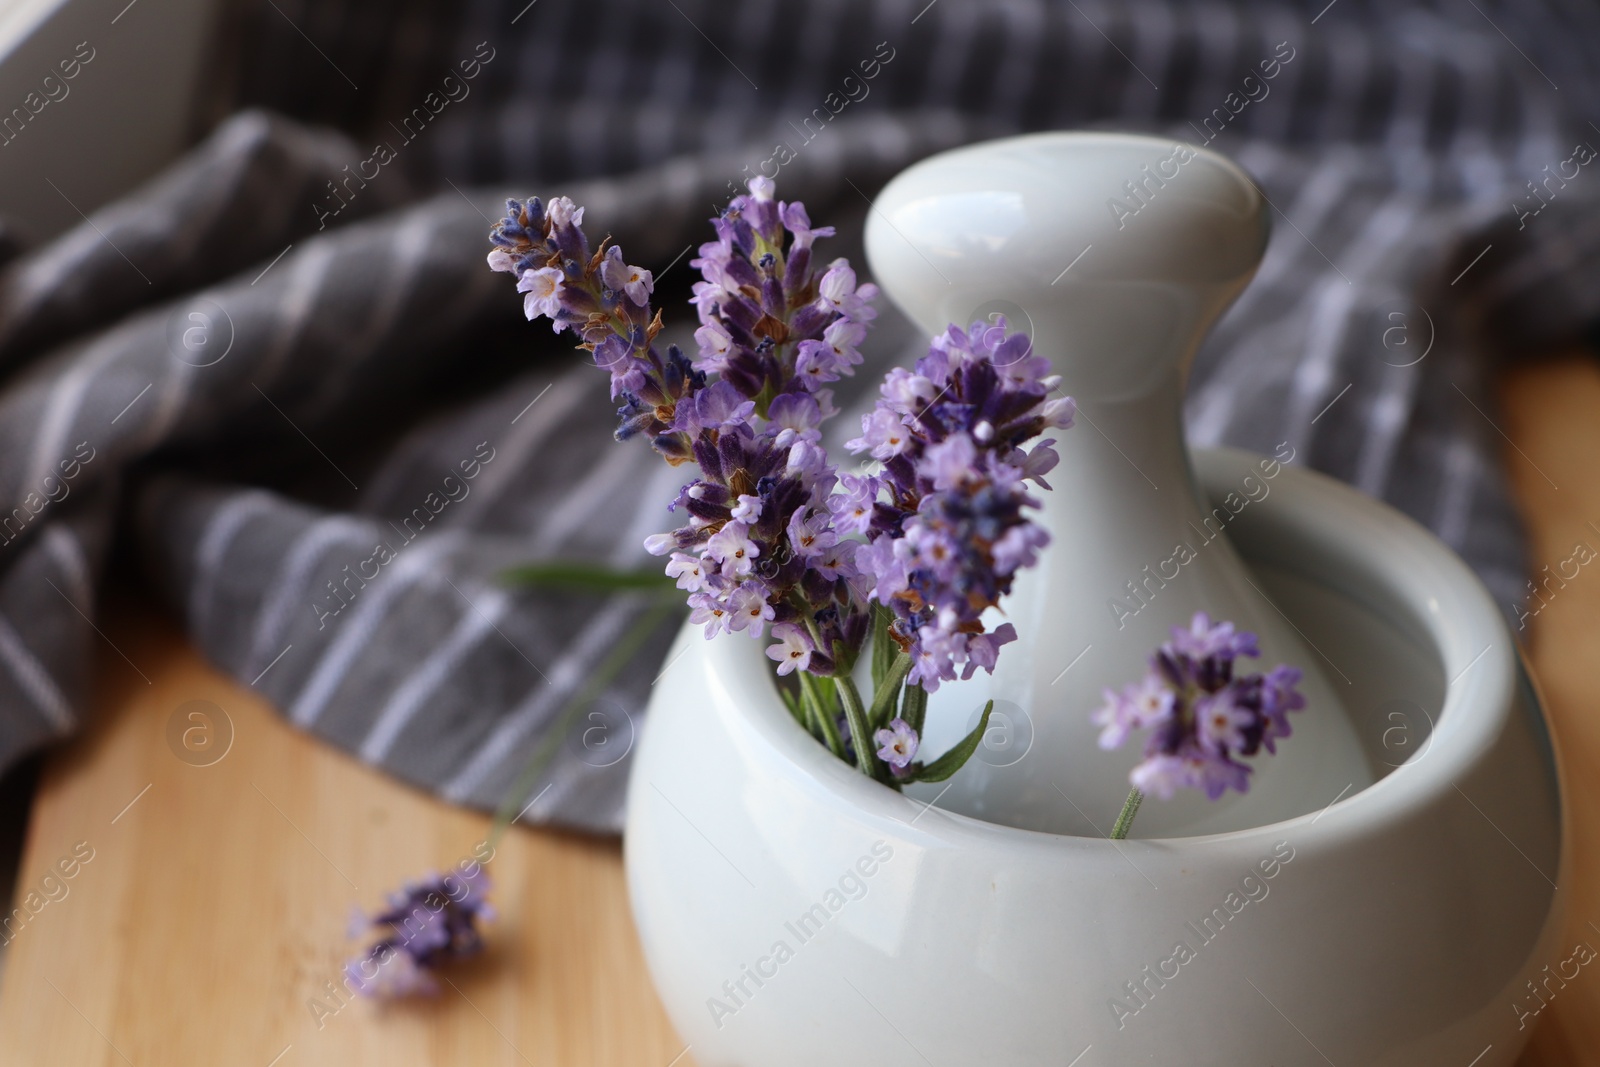 Photo of Mortar with fresh lavender flowers and pestle on table, closeup